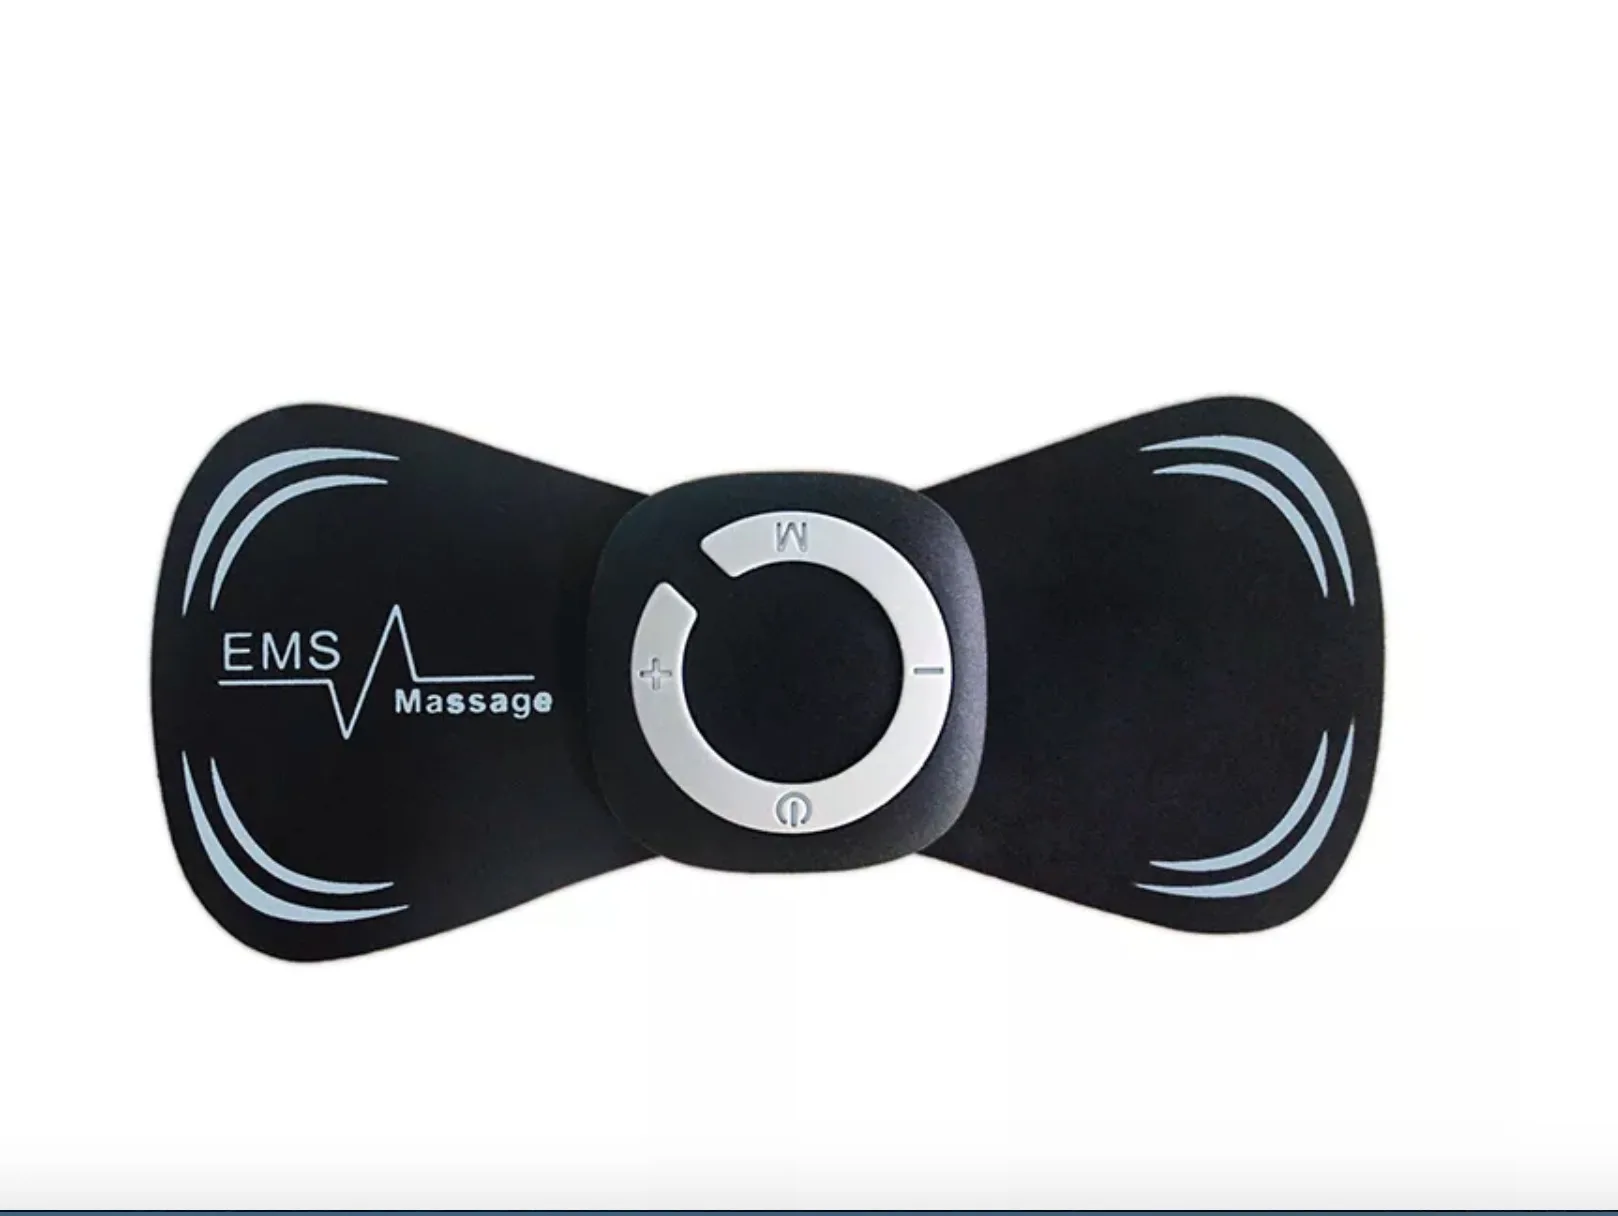 https://ae01.alicdn.com/kf/S63831c5a44ed4c769a085fff340570eas/Wireless-TENS-Unit-EMS-Muscle-Stimulator-Electric-Pulse-Massage-Rechargeable-Mini-Pain-Relief-Therapy-Device-for.jpg